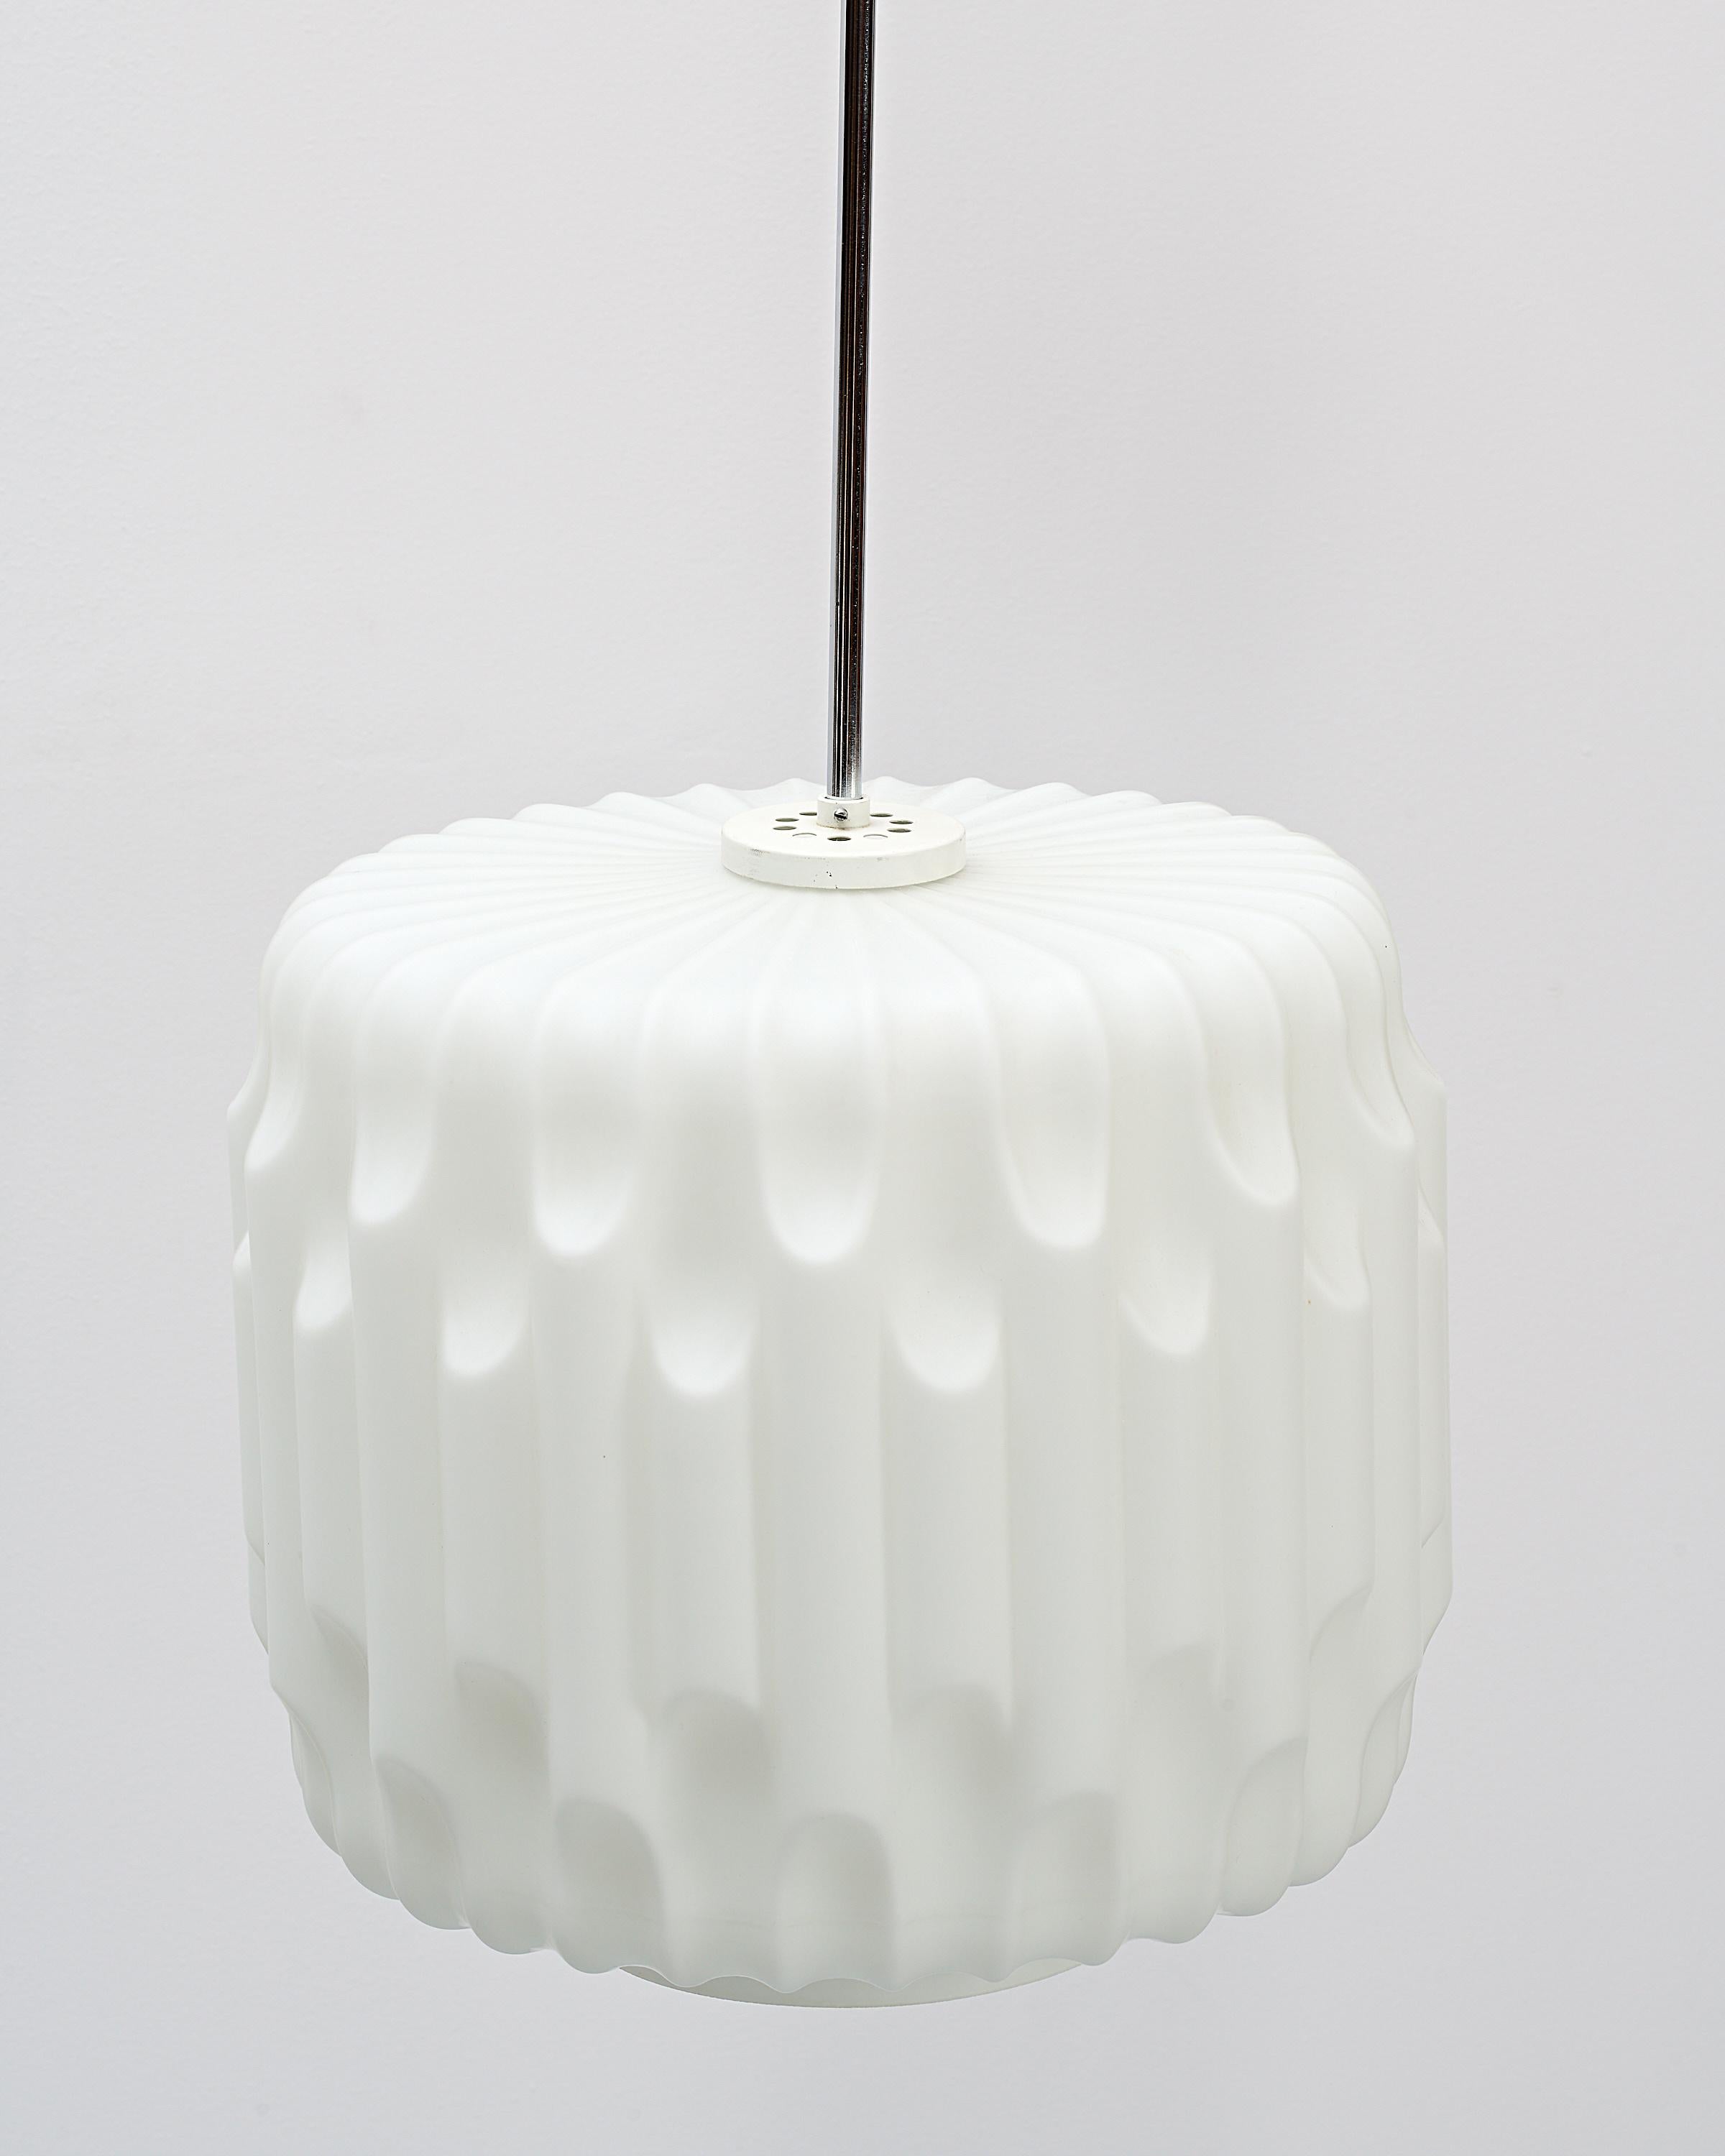 An impressive pendant made of thick white opaline glass in excellent condition. A most unique structure of the glass lampshade giving a diffused light effect. The light is hanging from a very long chromed tubing.